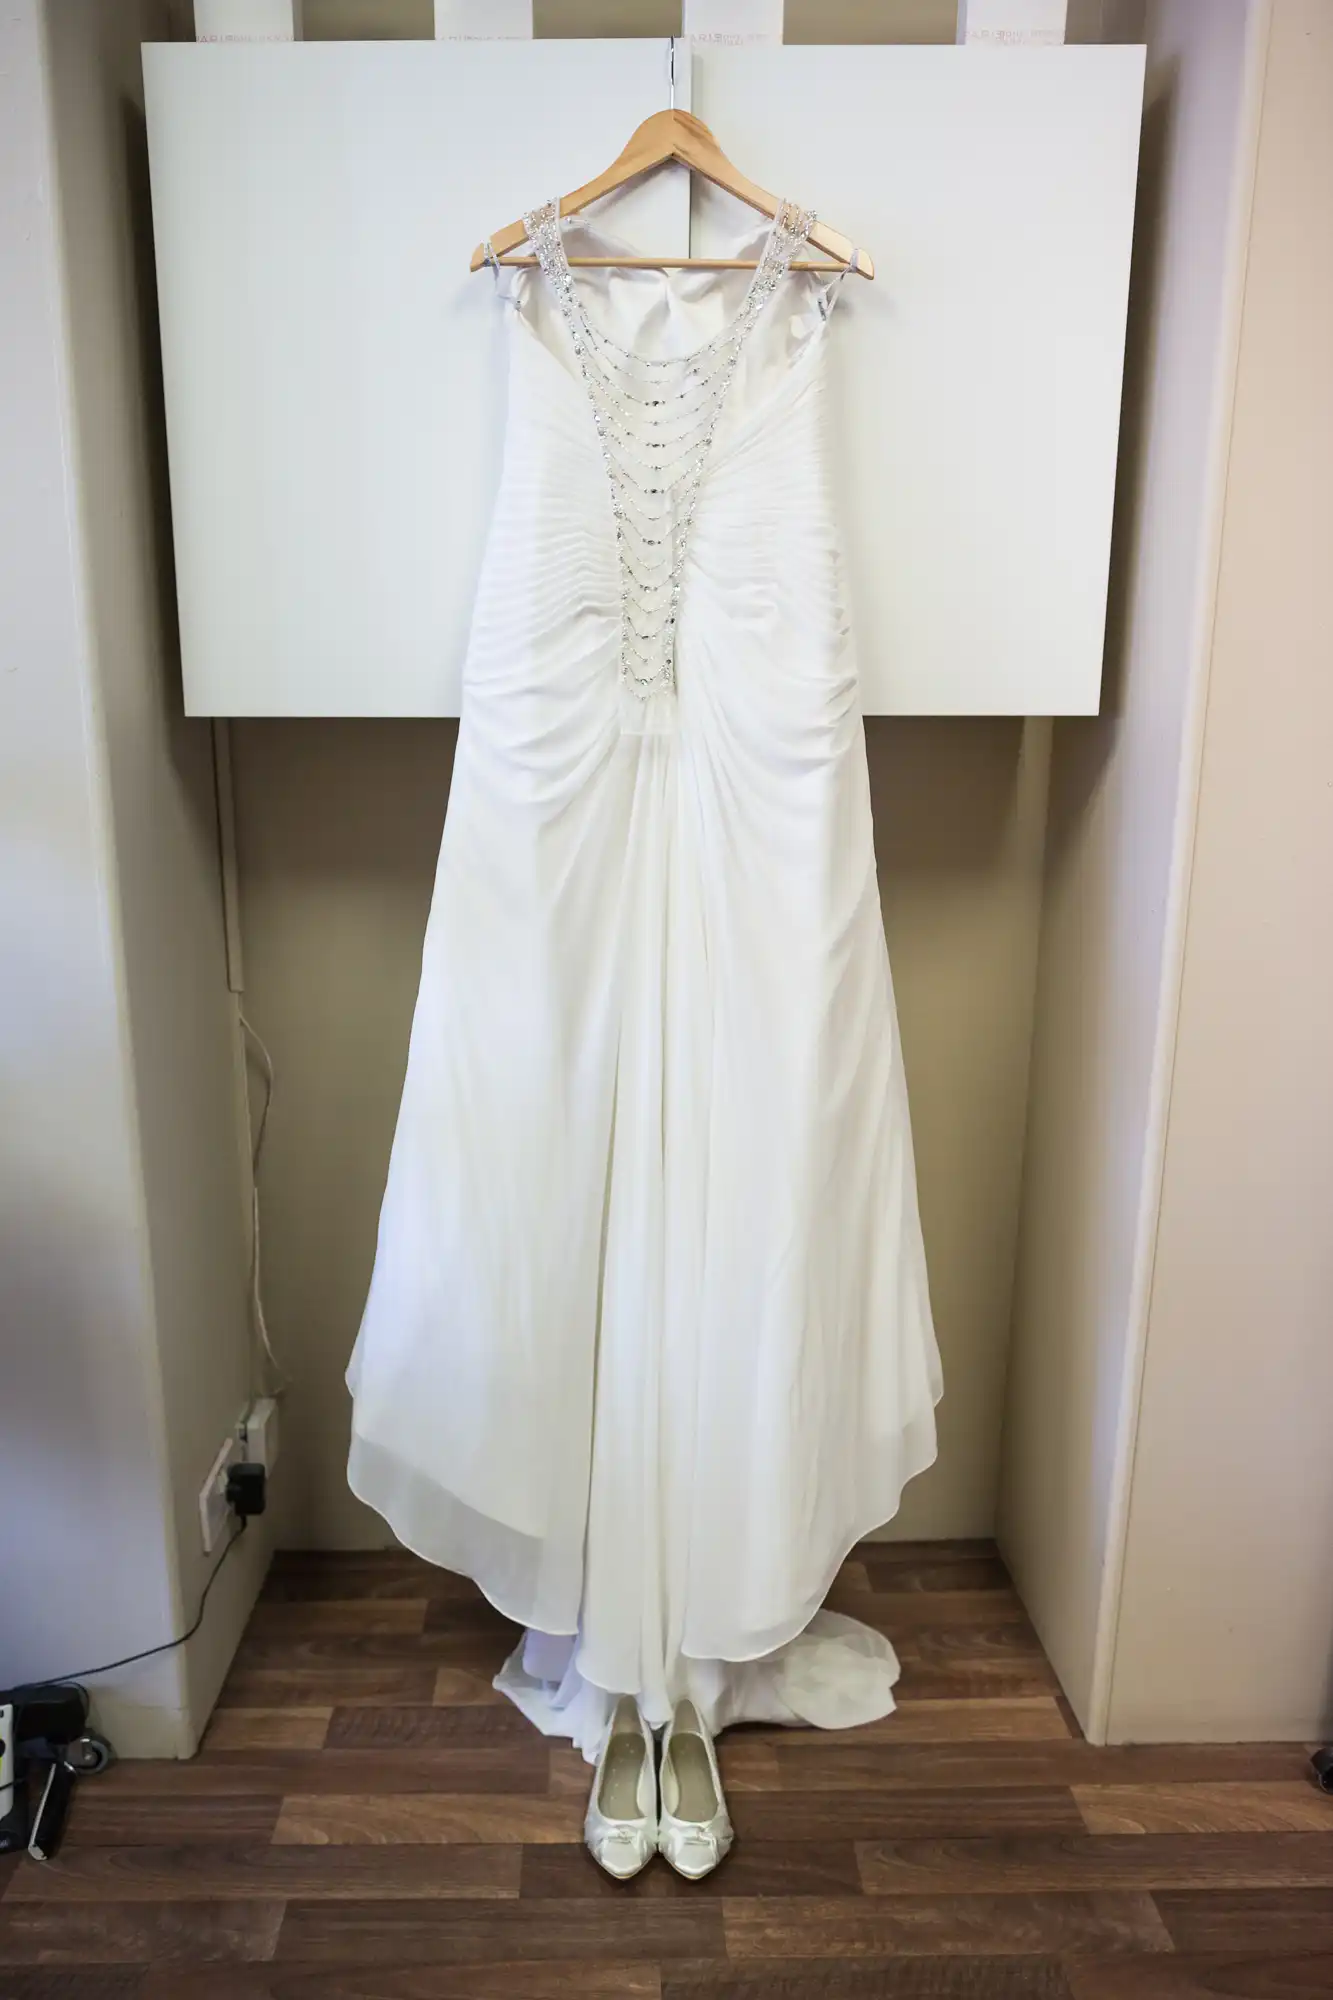 A white wedding dress with detailed beadwork on the bodice hangs on a wooden hanger against a blank canvas, with white shoes placed below it on a wooden floor.